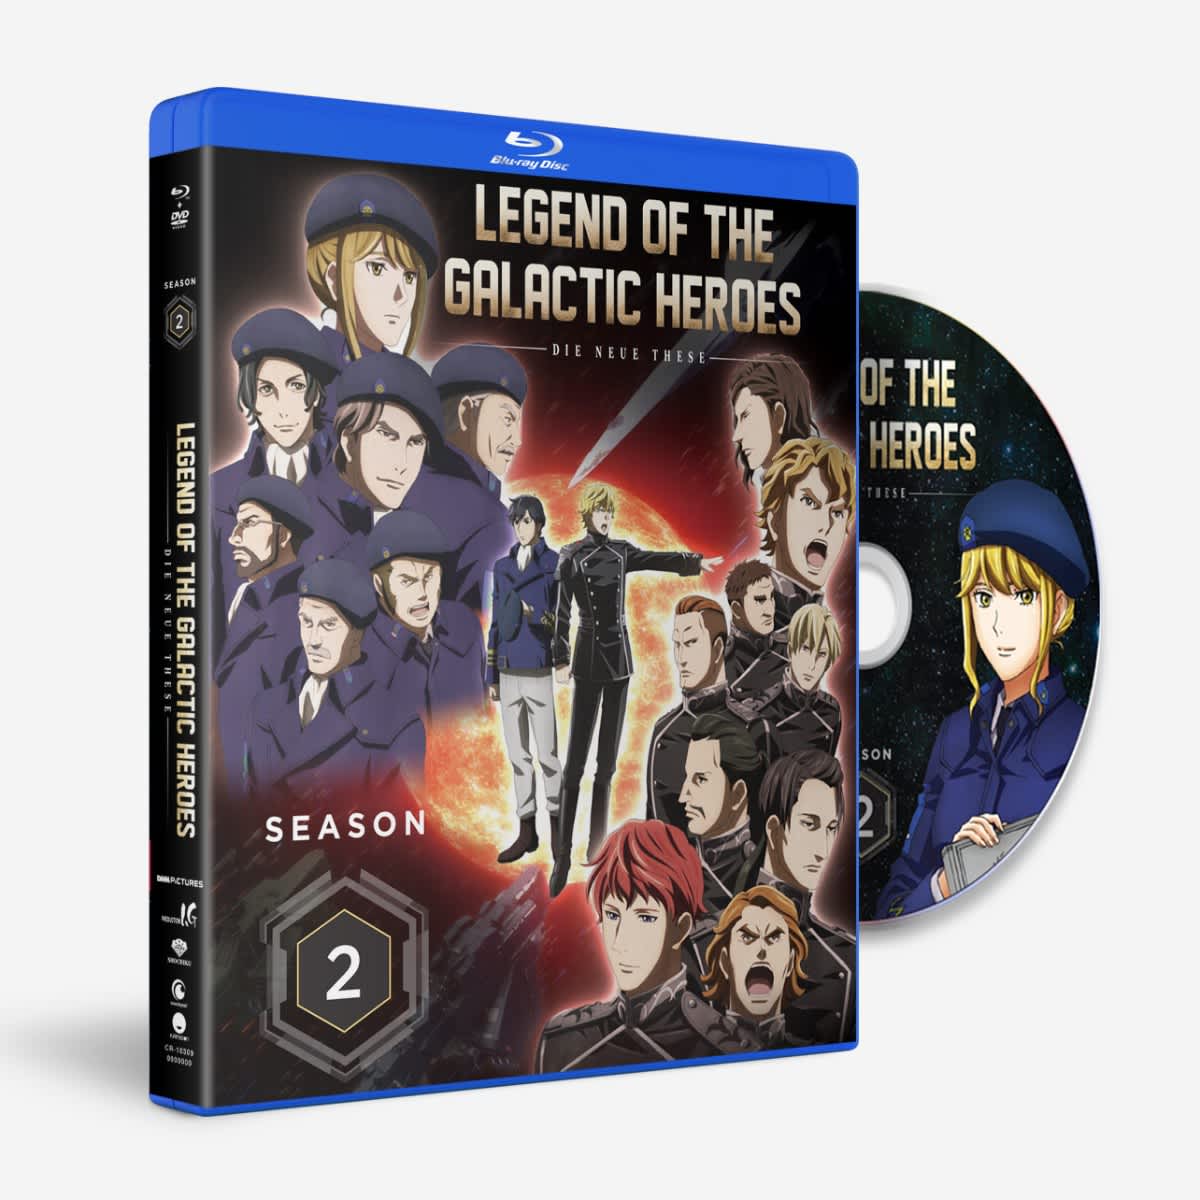 The Legend of the Legendary Heroes, Part 2 Blu-ray (Limited Edition)